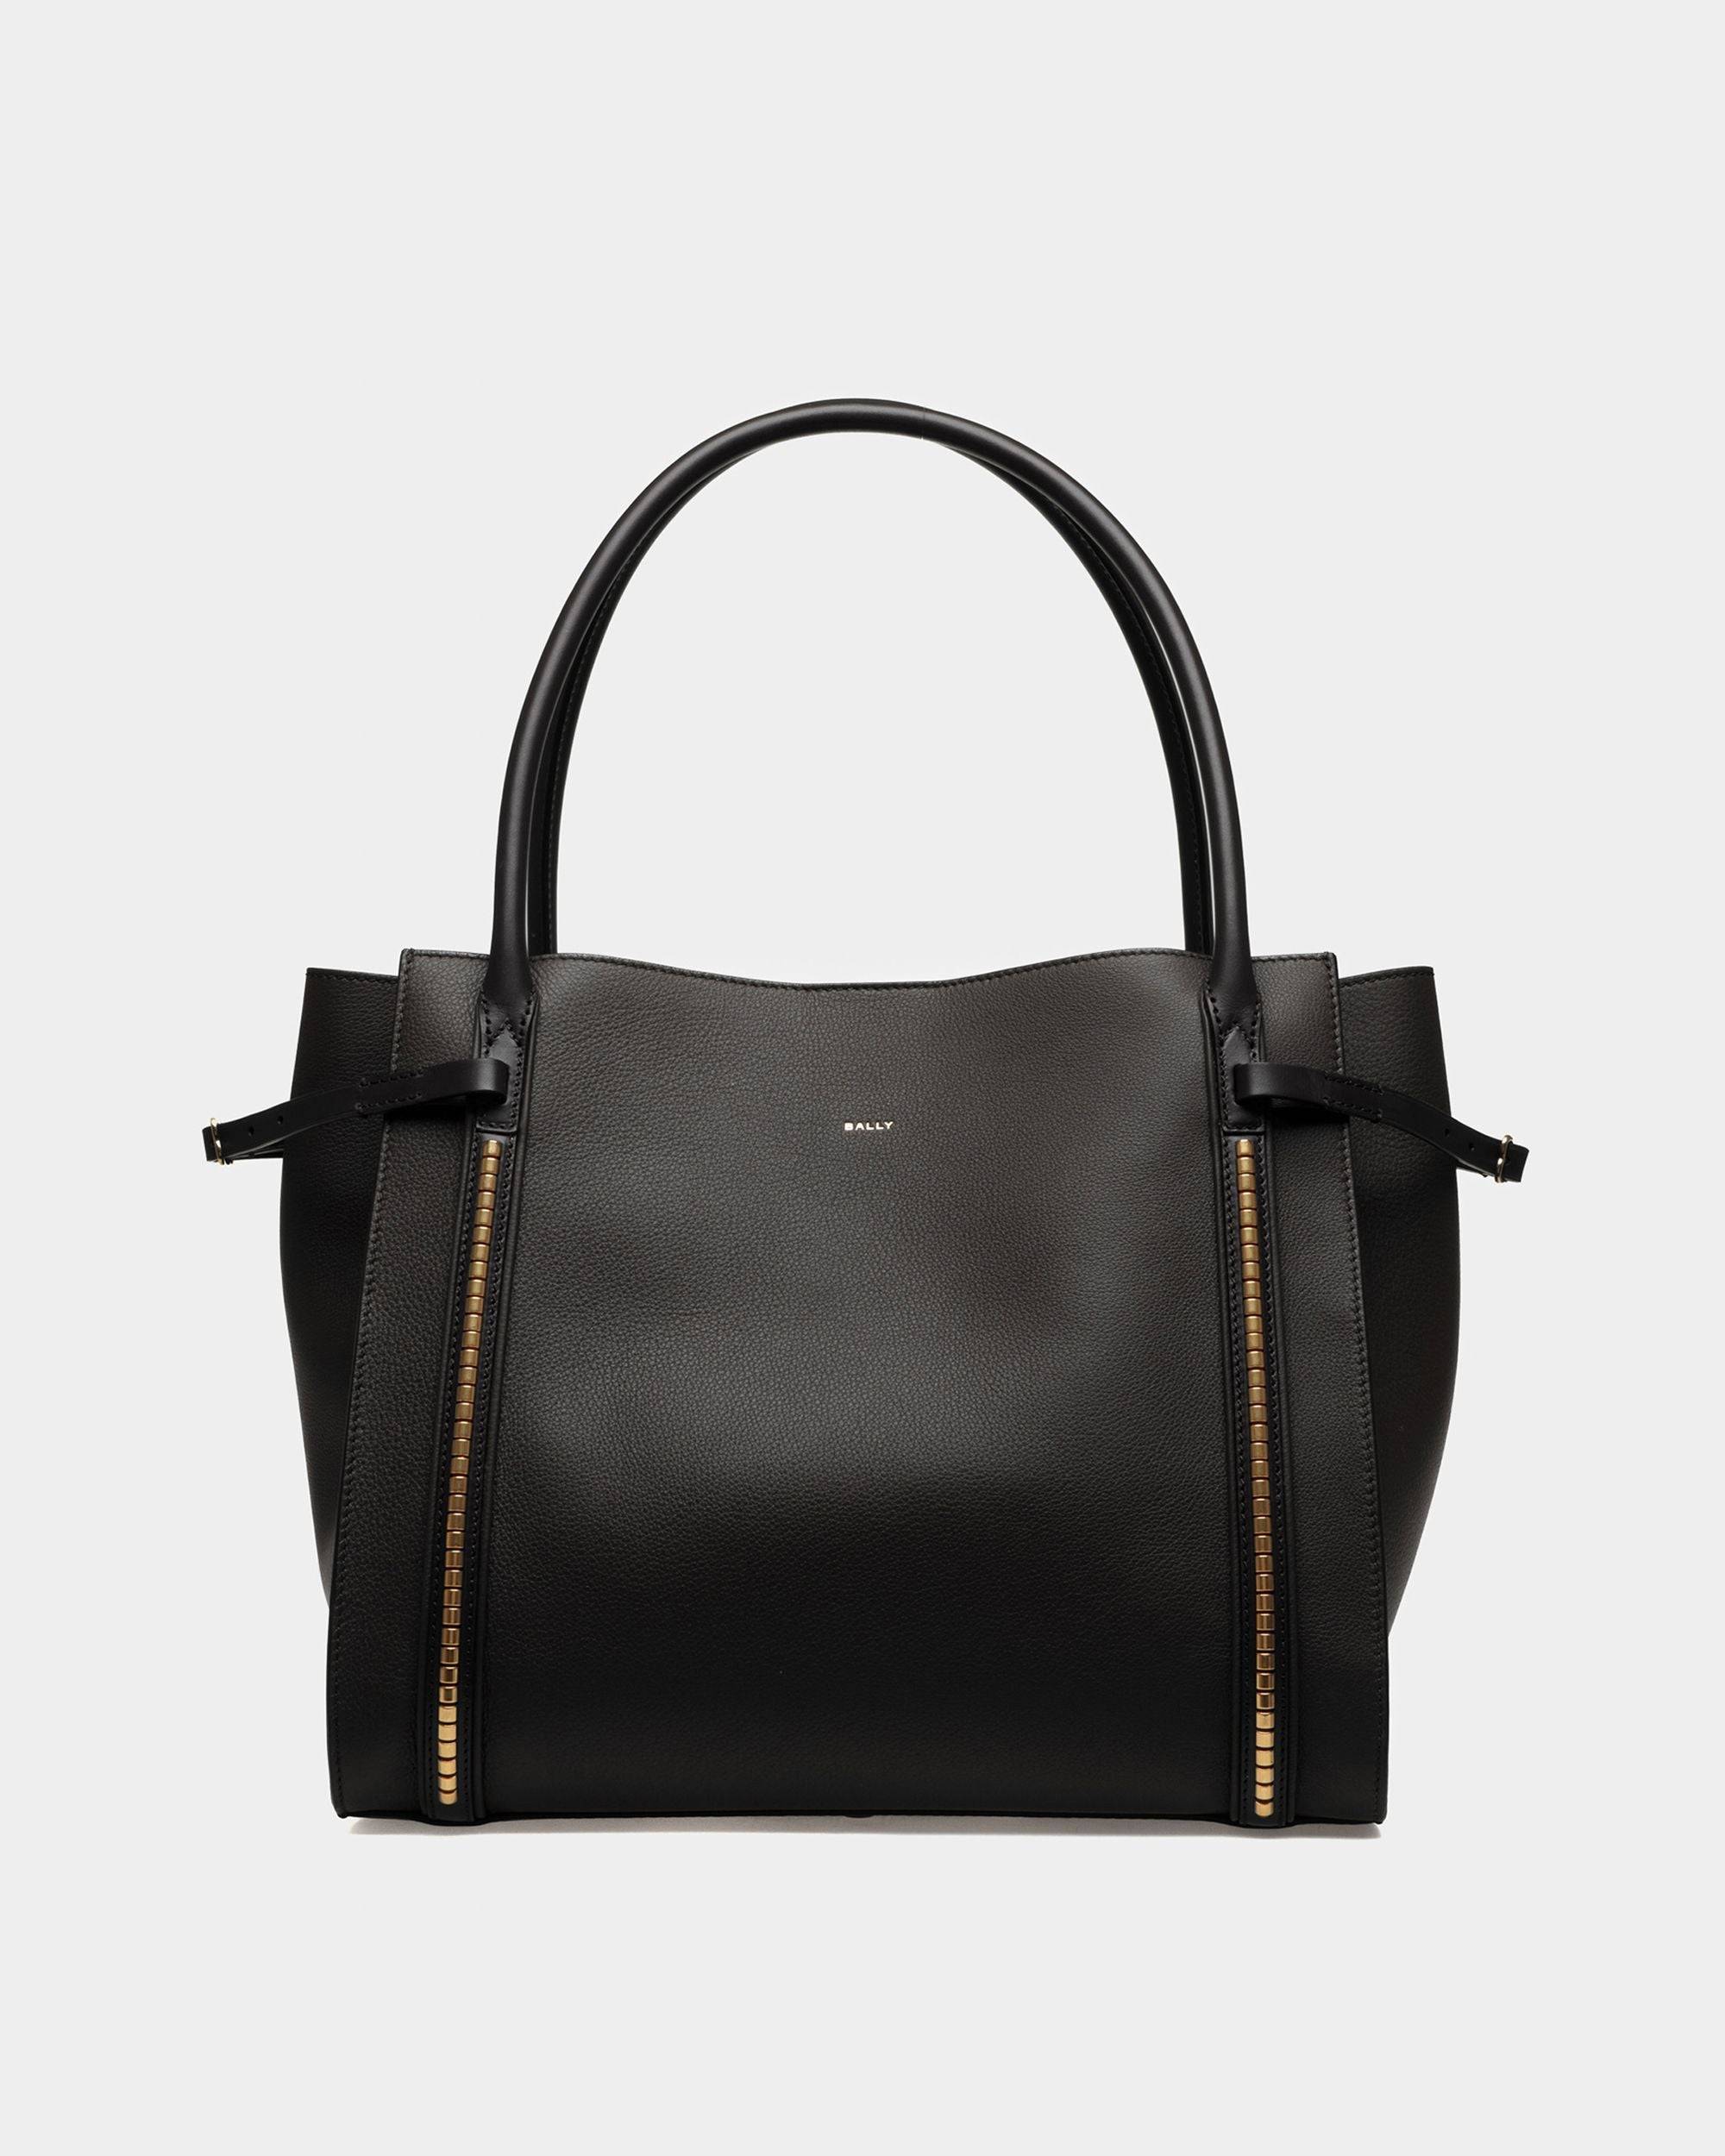 Chesney Large Tote Bag | Women's Tote | Black Leather | Bally | Still Life Front